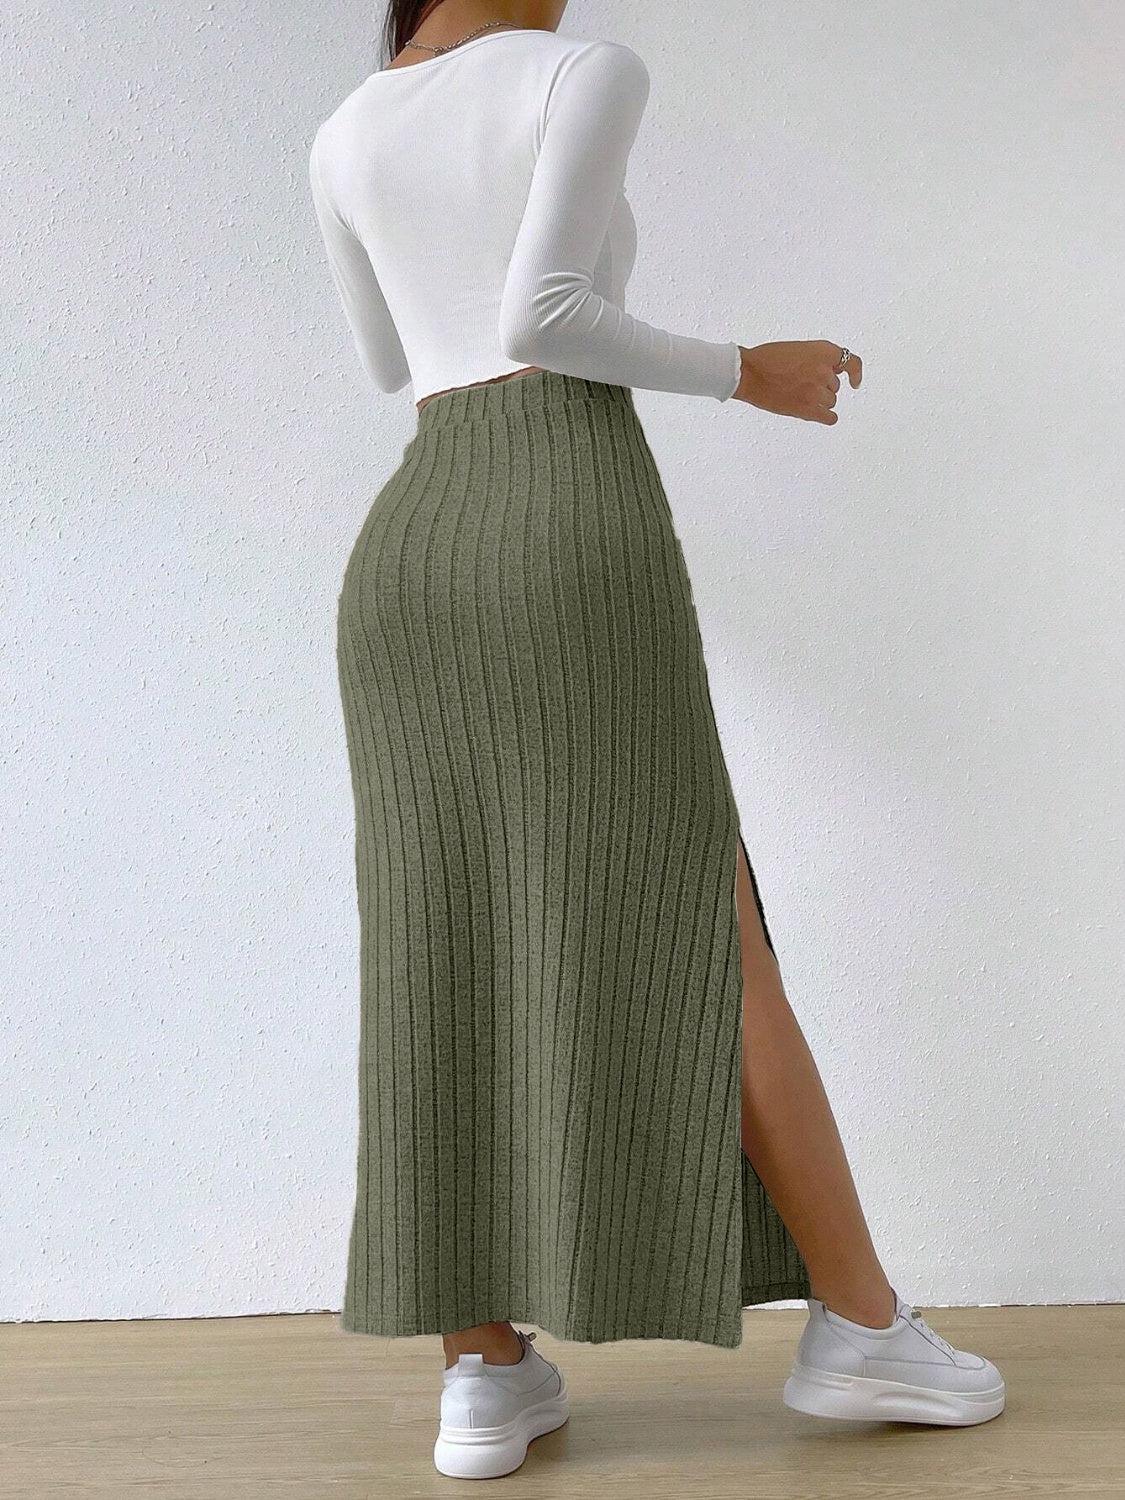 a woman in a white top and a green skirt